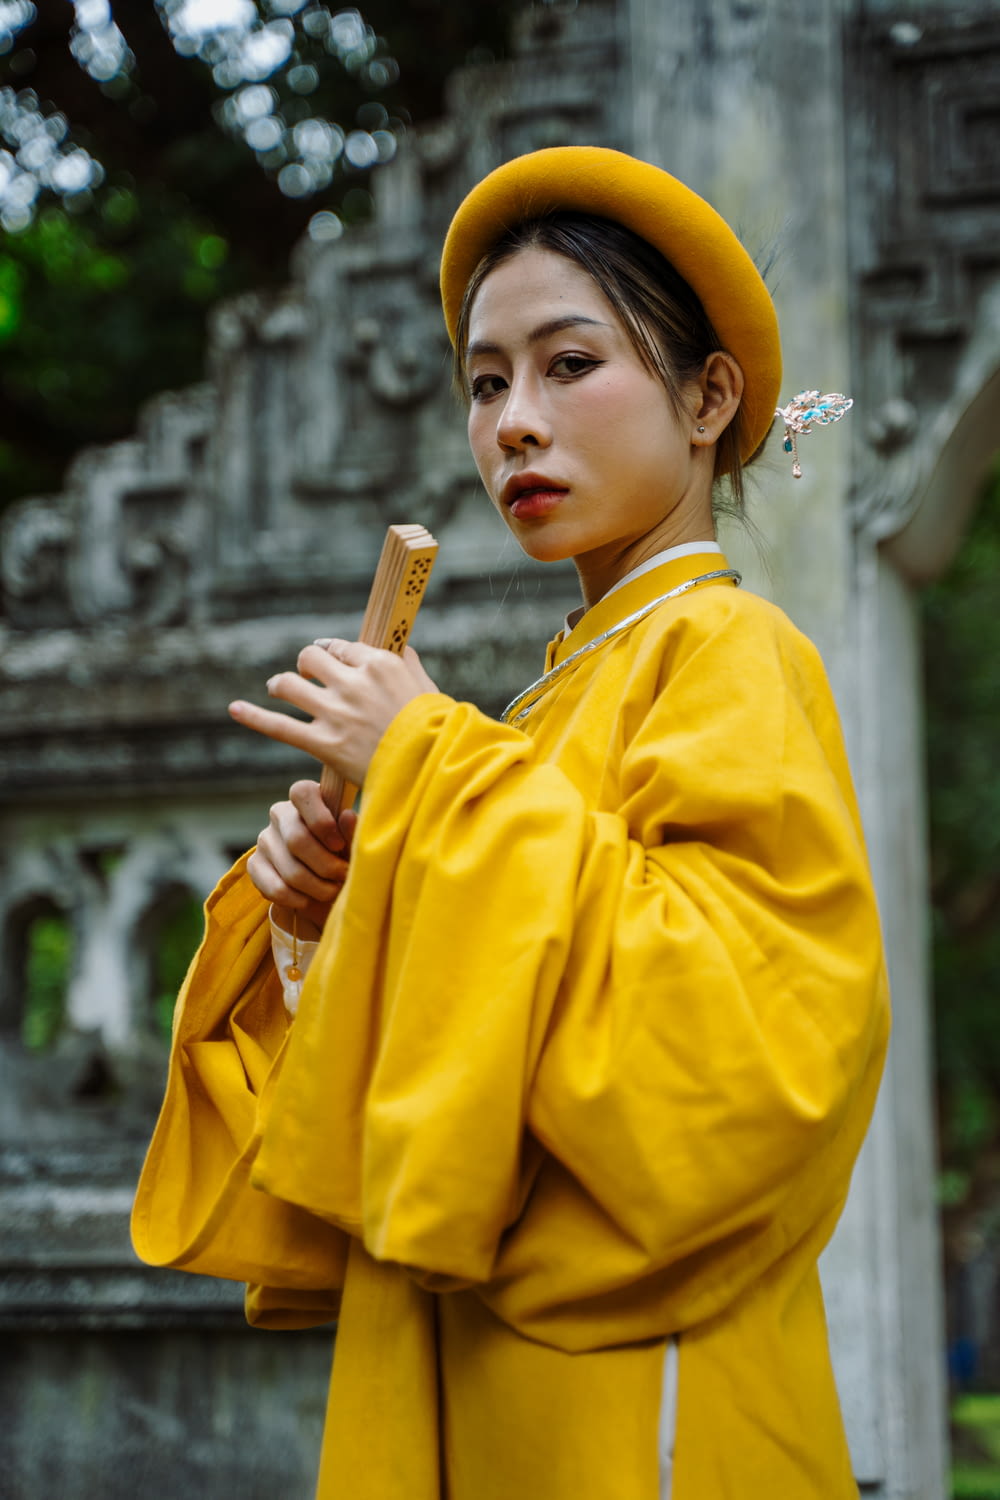 a woman in a yellow outfit holding a stick